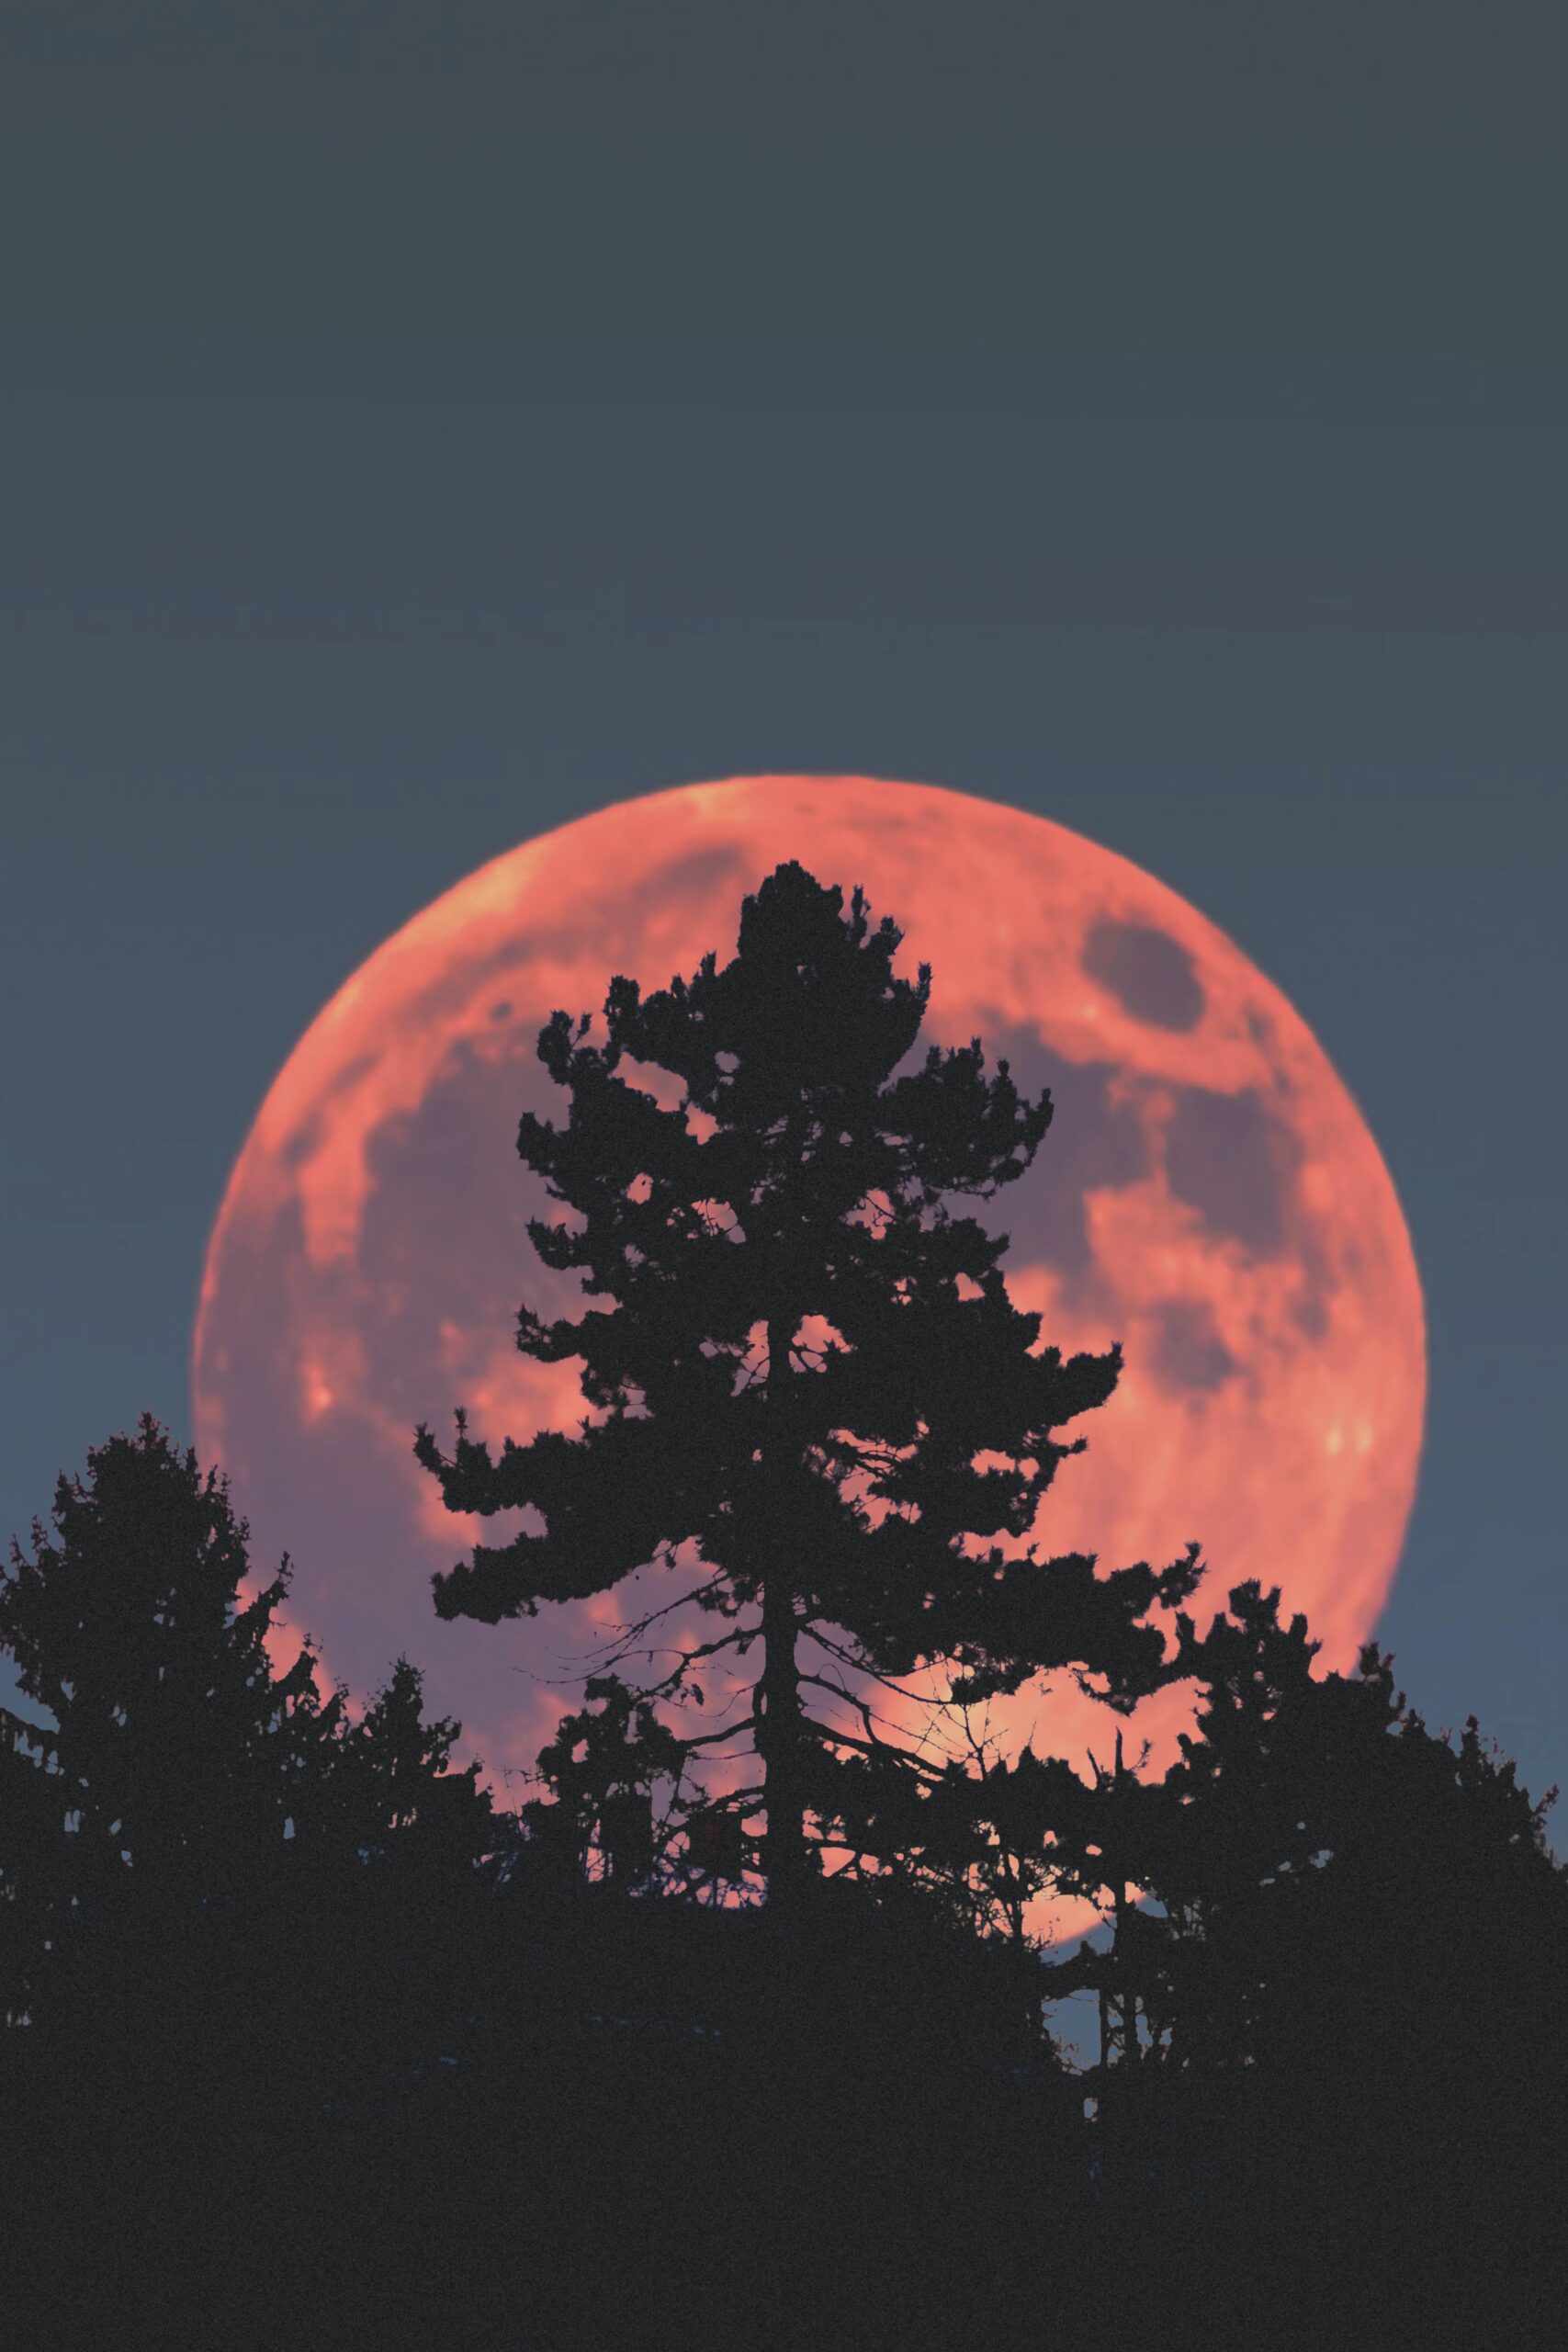 Image of a pink colored full moon with a tree in front of it